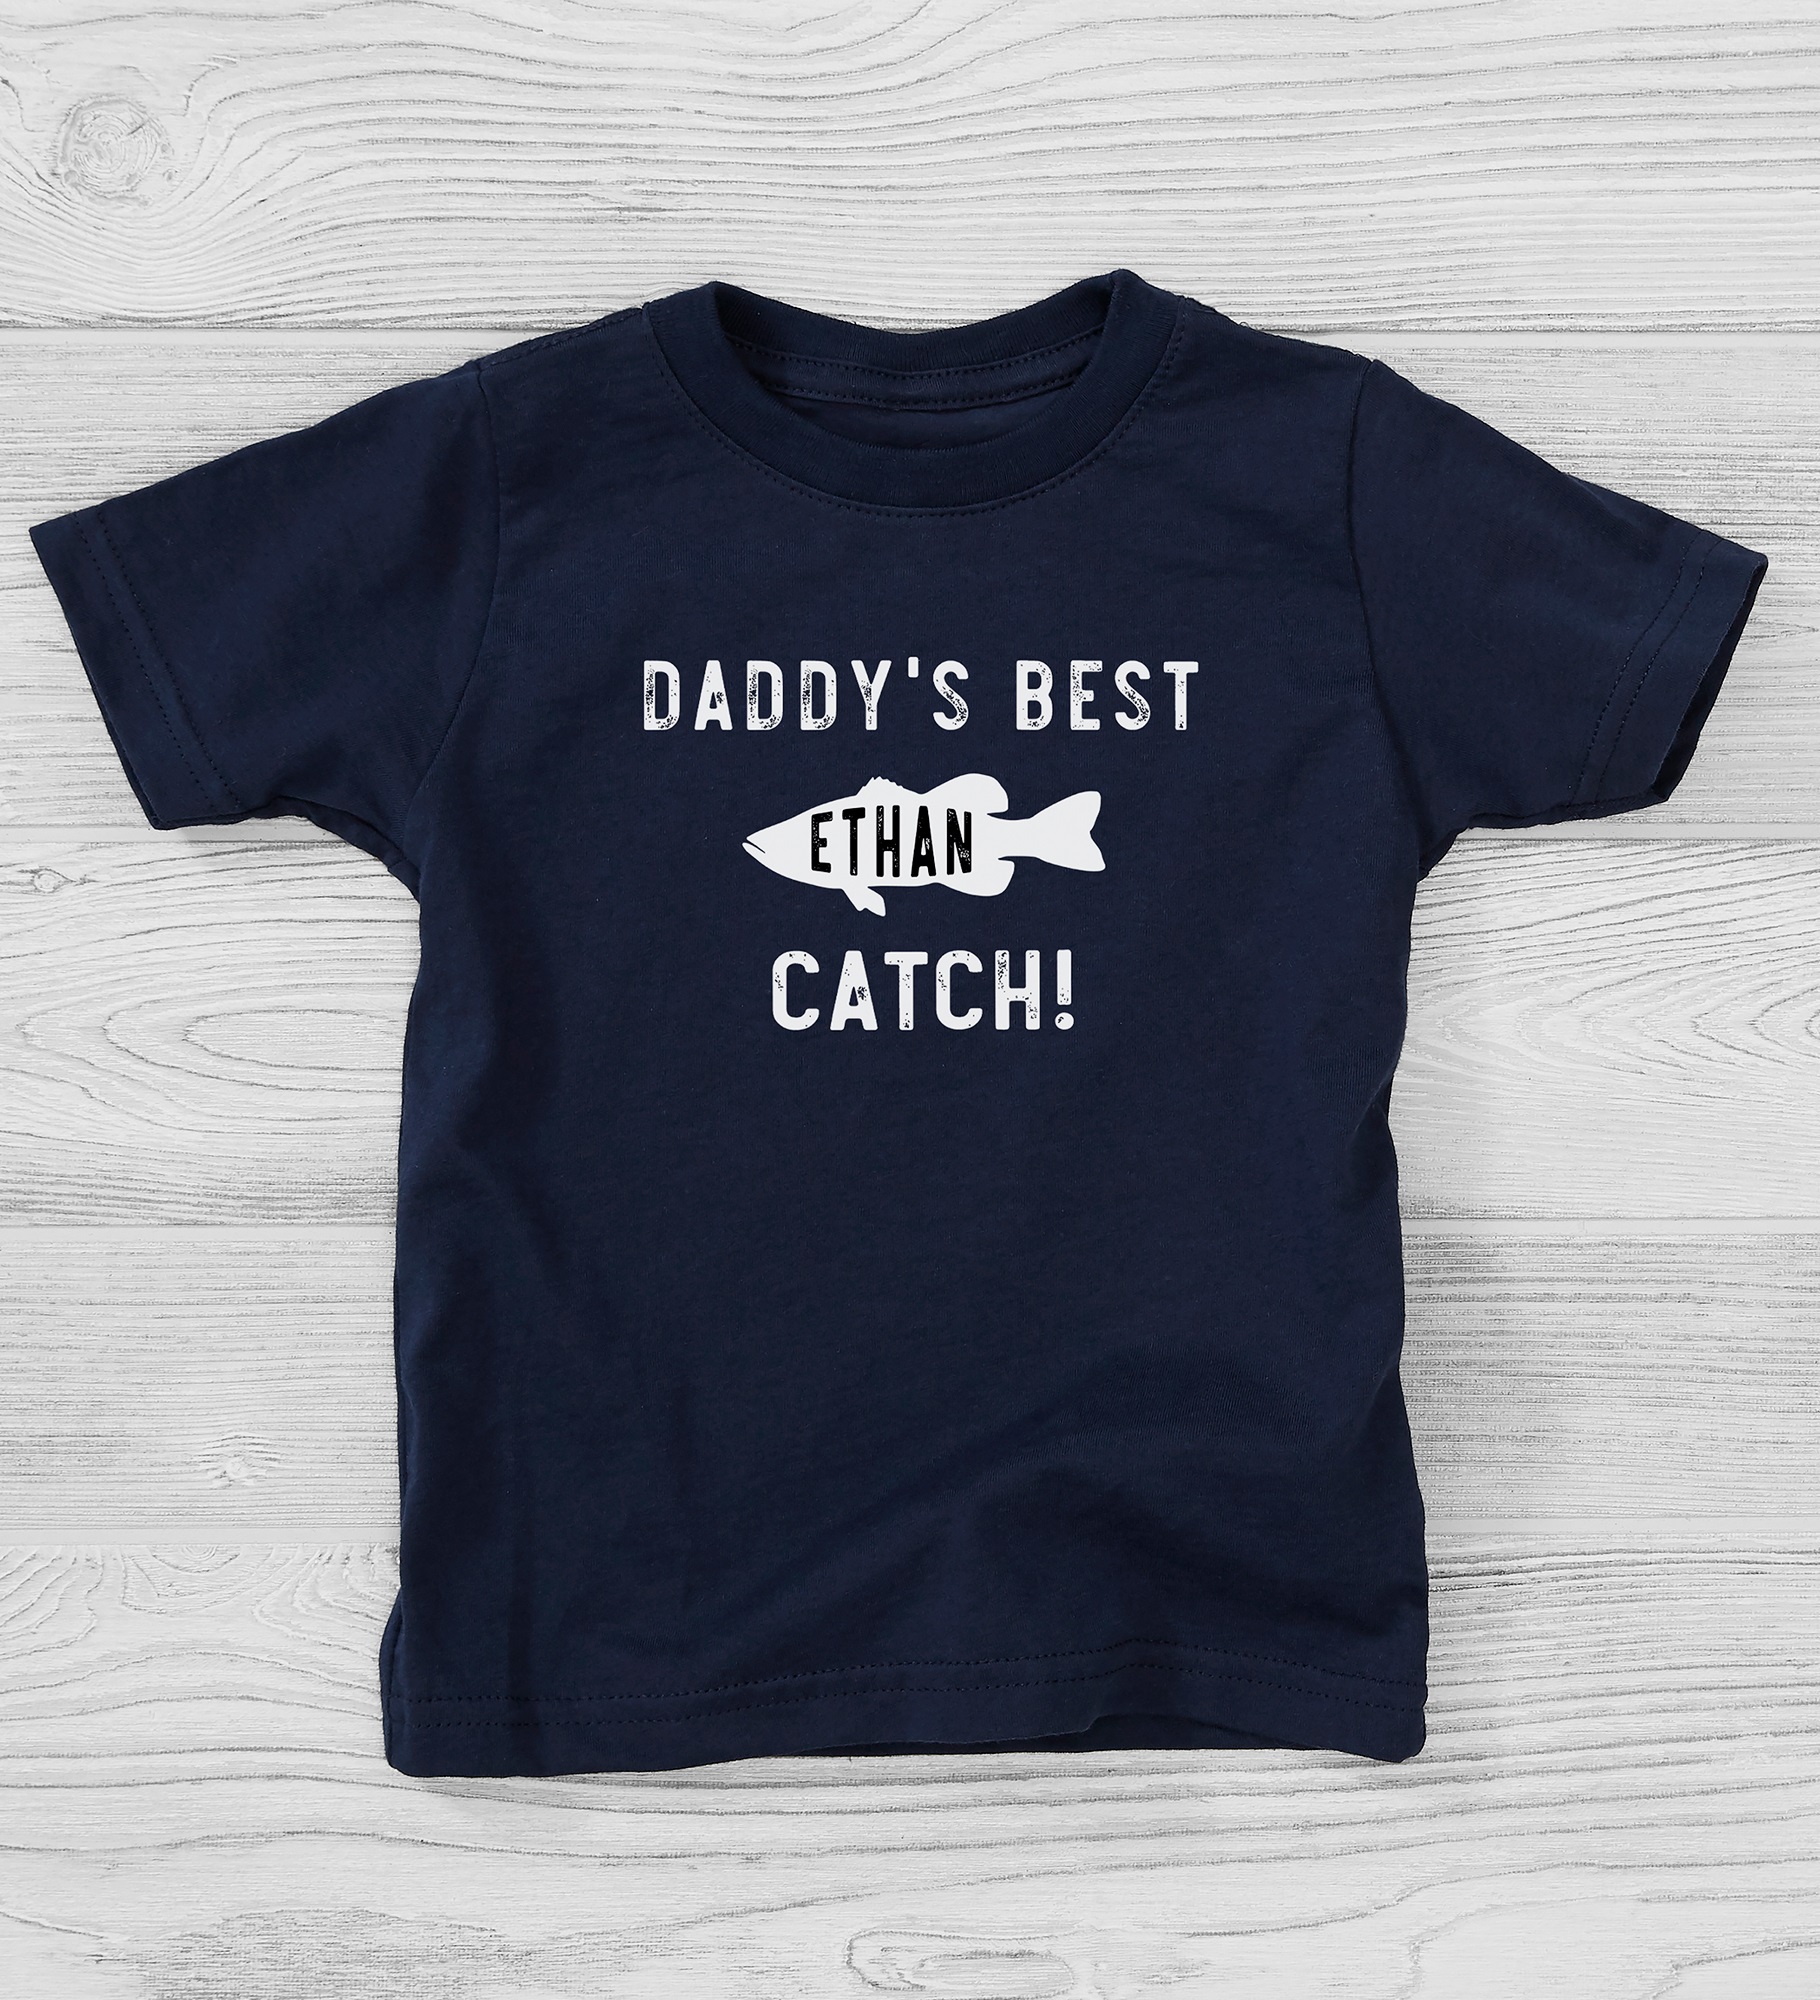 Reel Cool Like Dad Personalized Kids Shirt